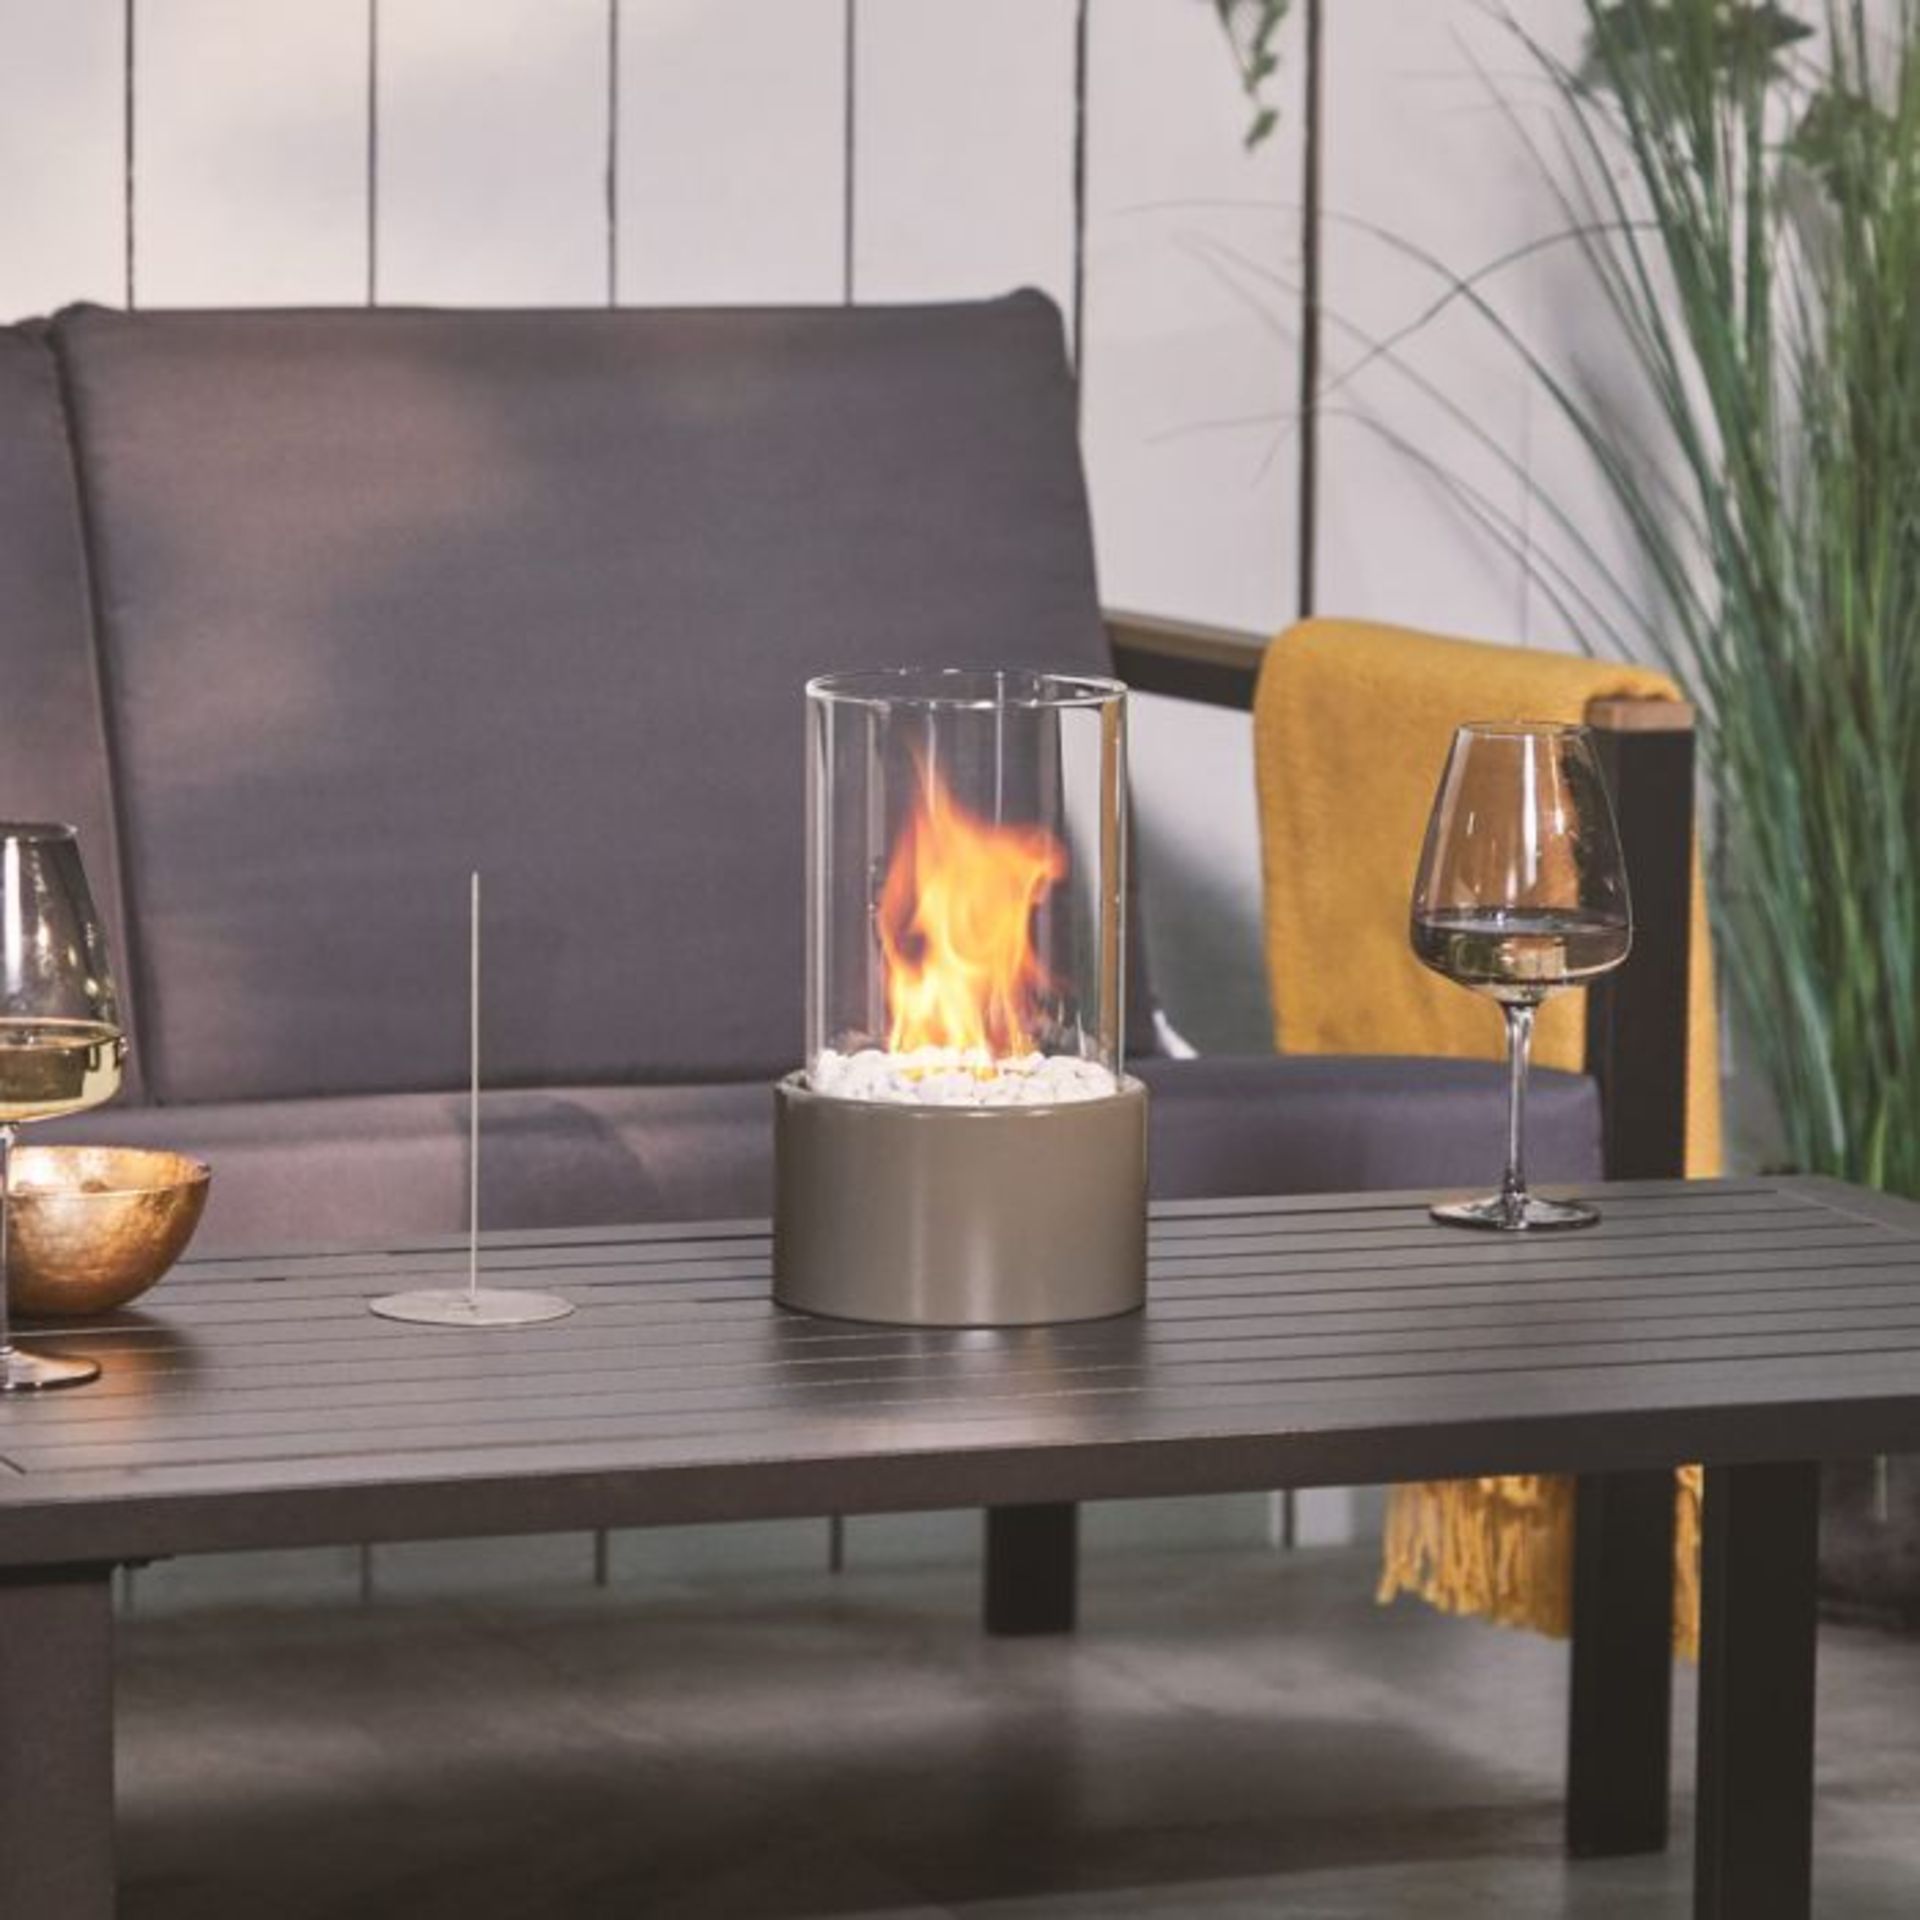 Round Bioethanol Tabletop Fireplace. - ER51. Turn up the charm and create a warm haven in your